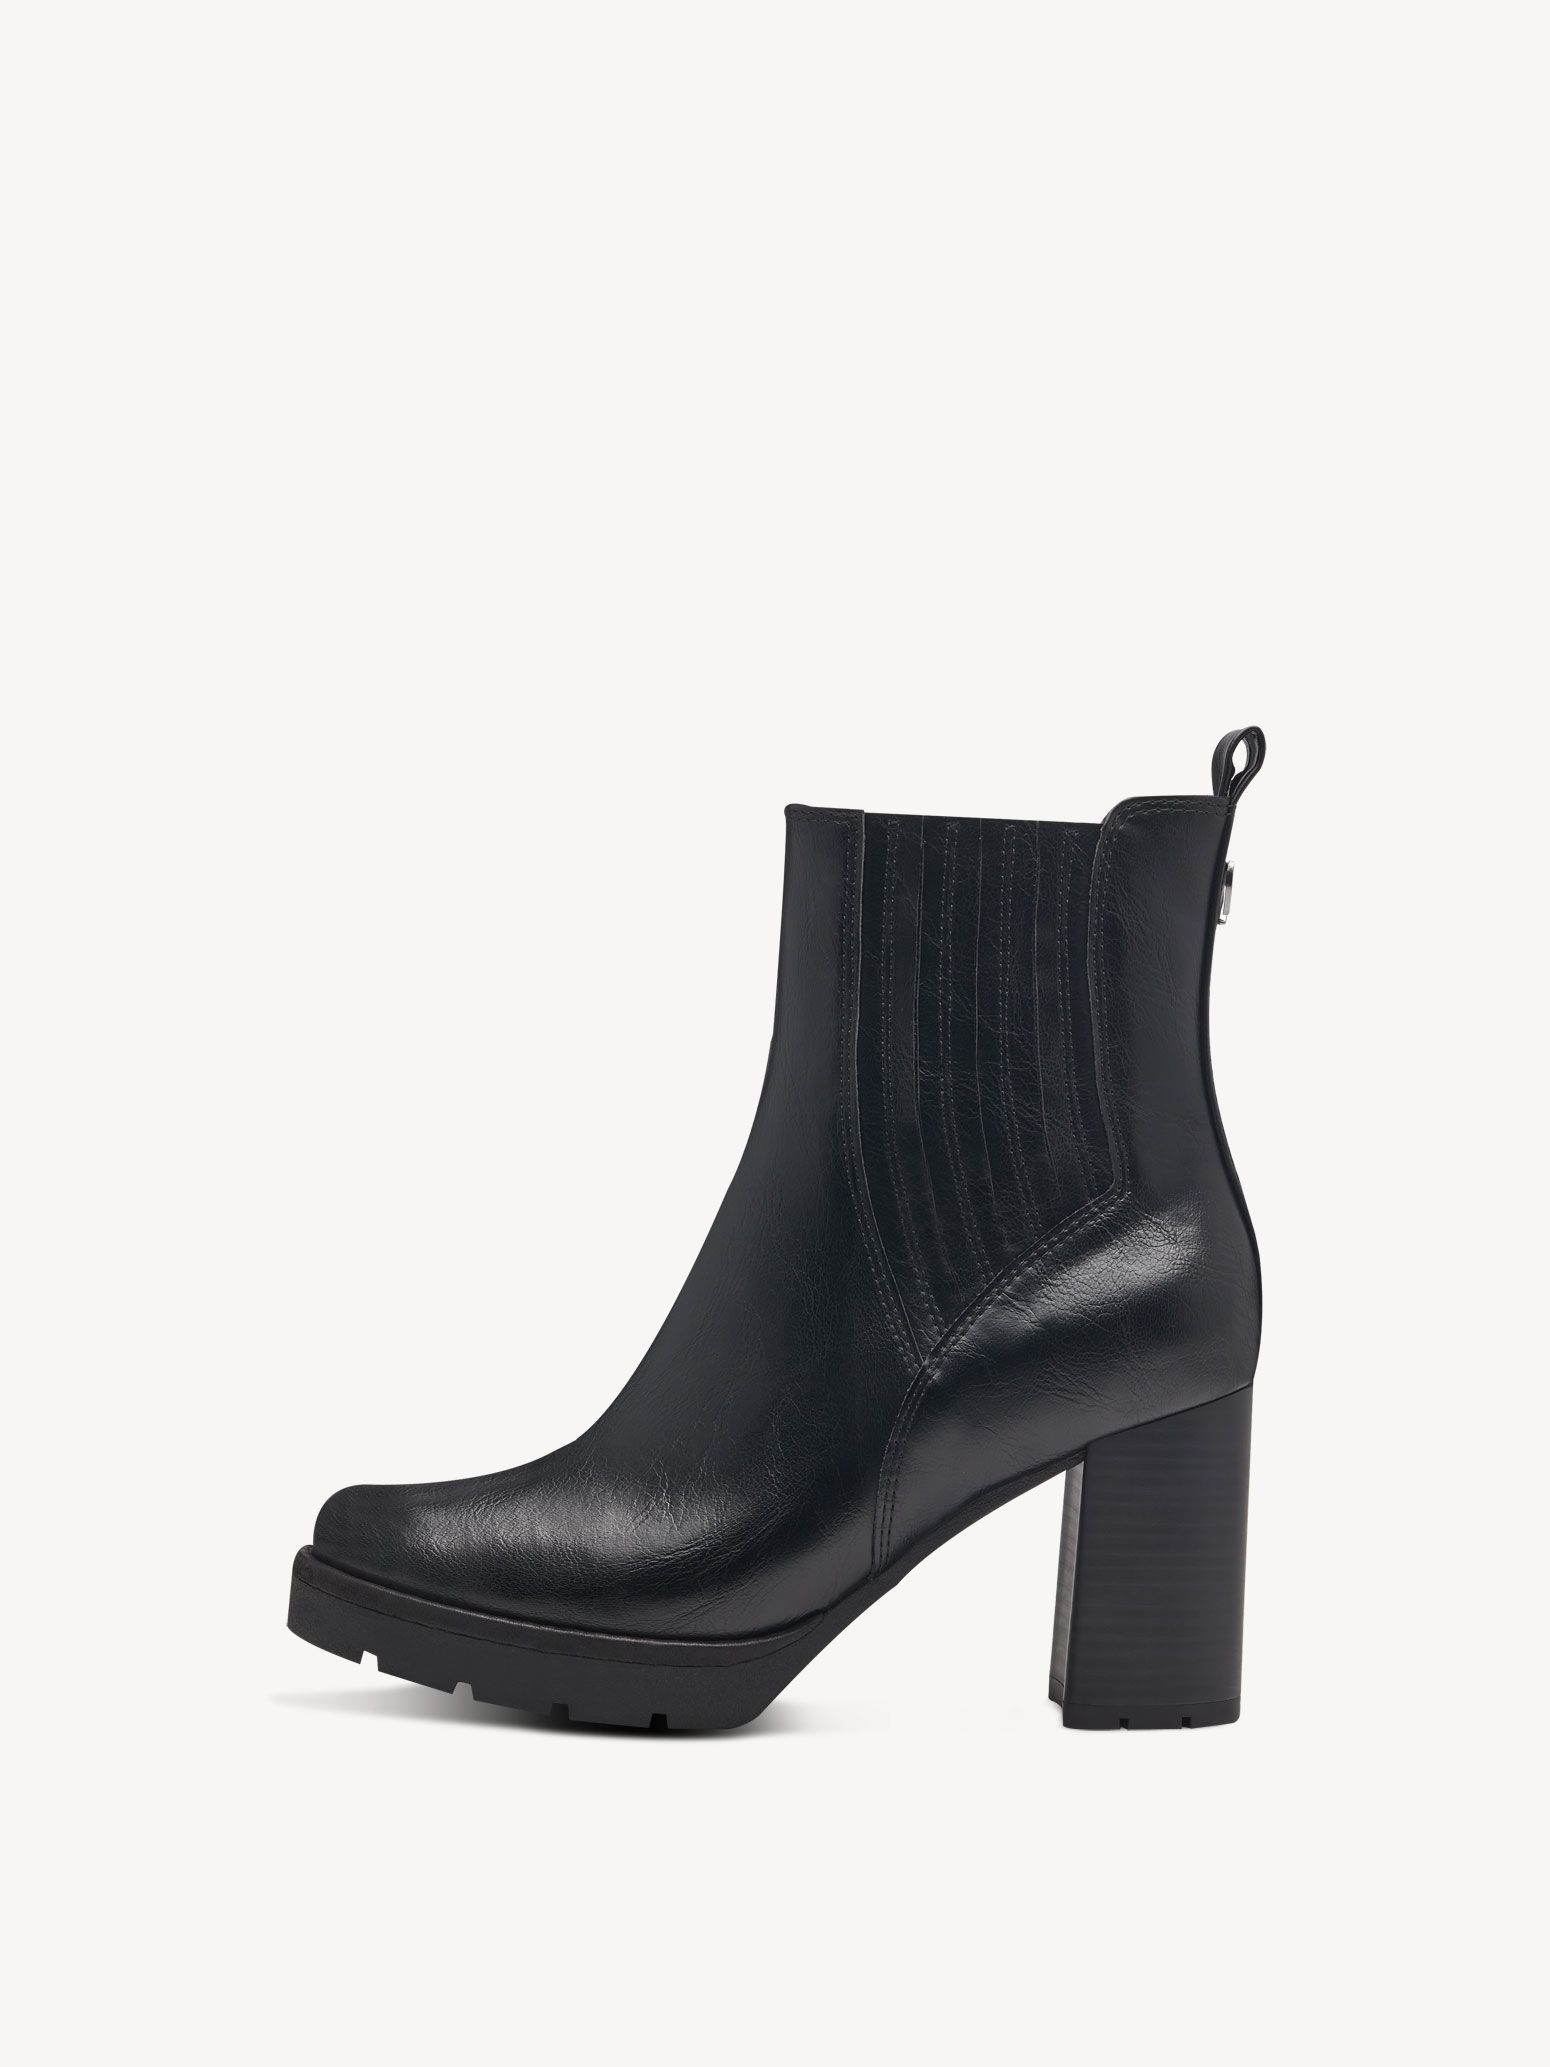 Chelsea boot 2-25463-41: Buy Chelsea Boots from Marco Tozzi online!